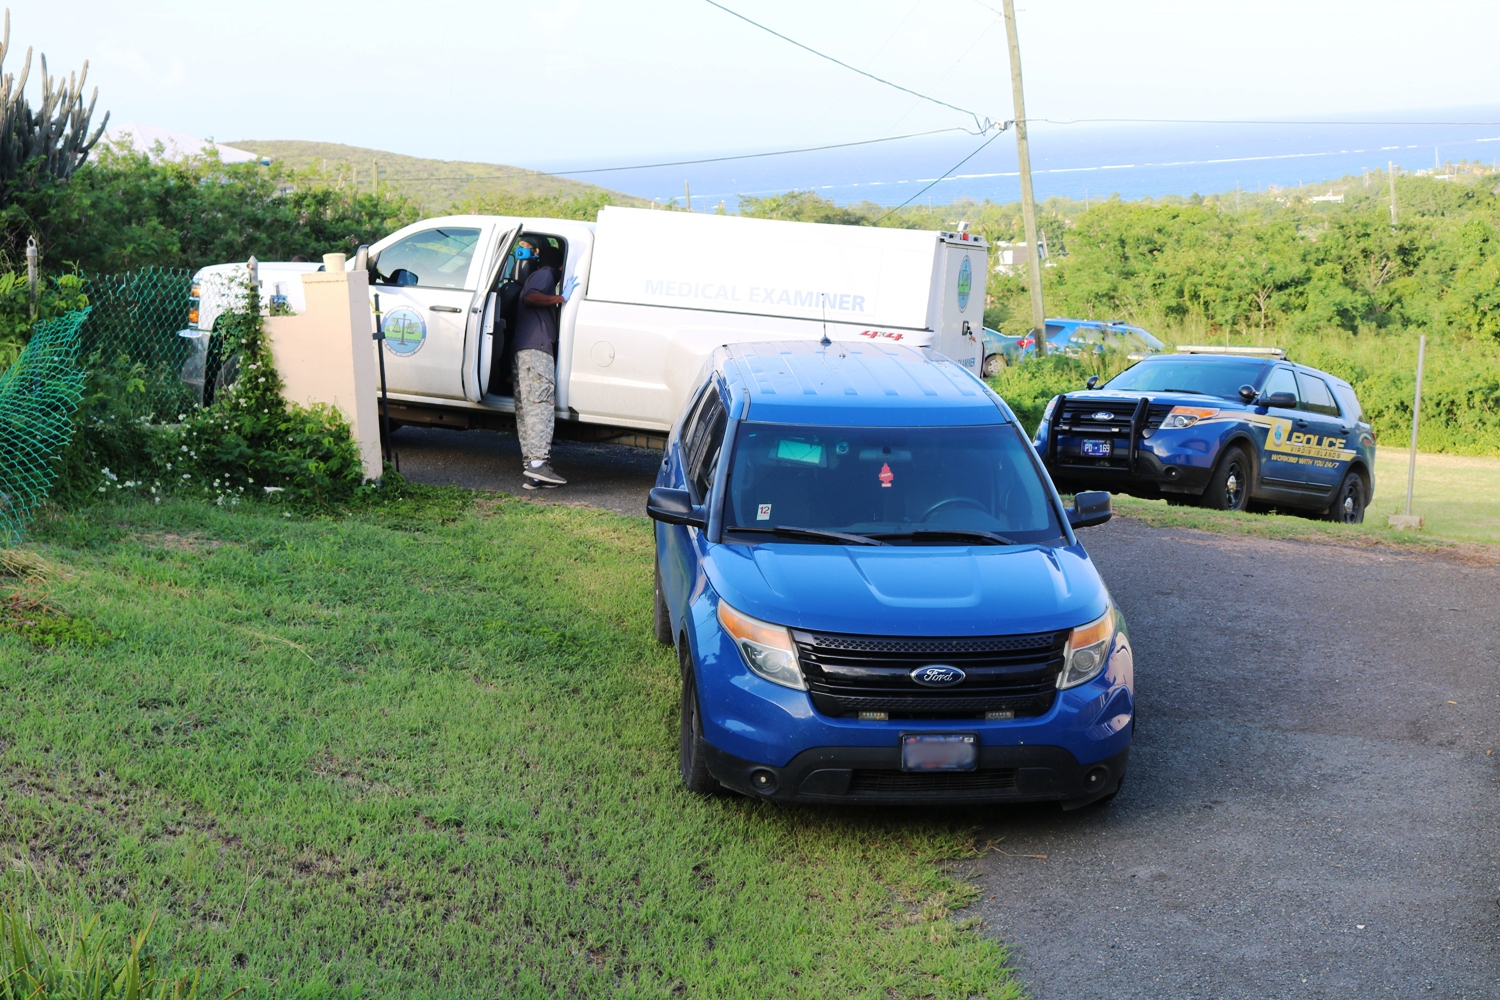 St. Croix Man Shot Dead Near His House In Catherine's Hope Sunday